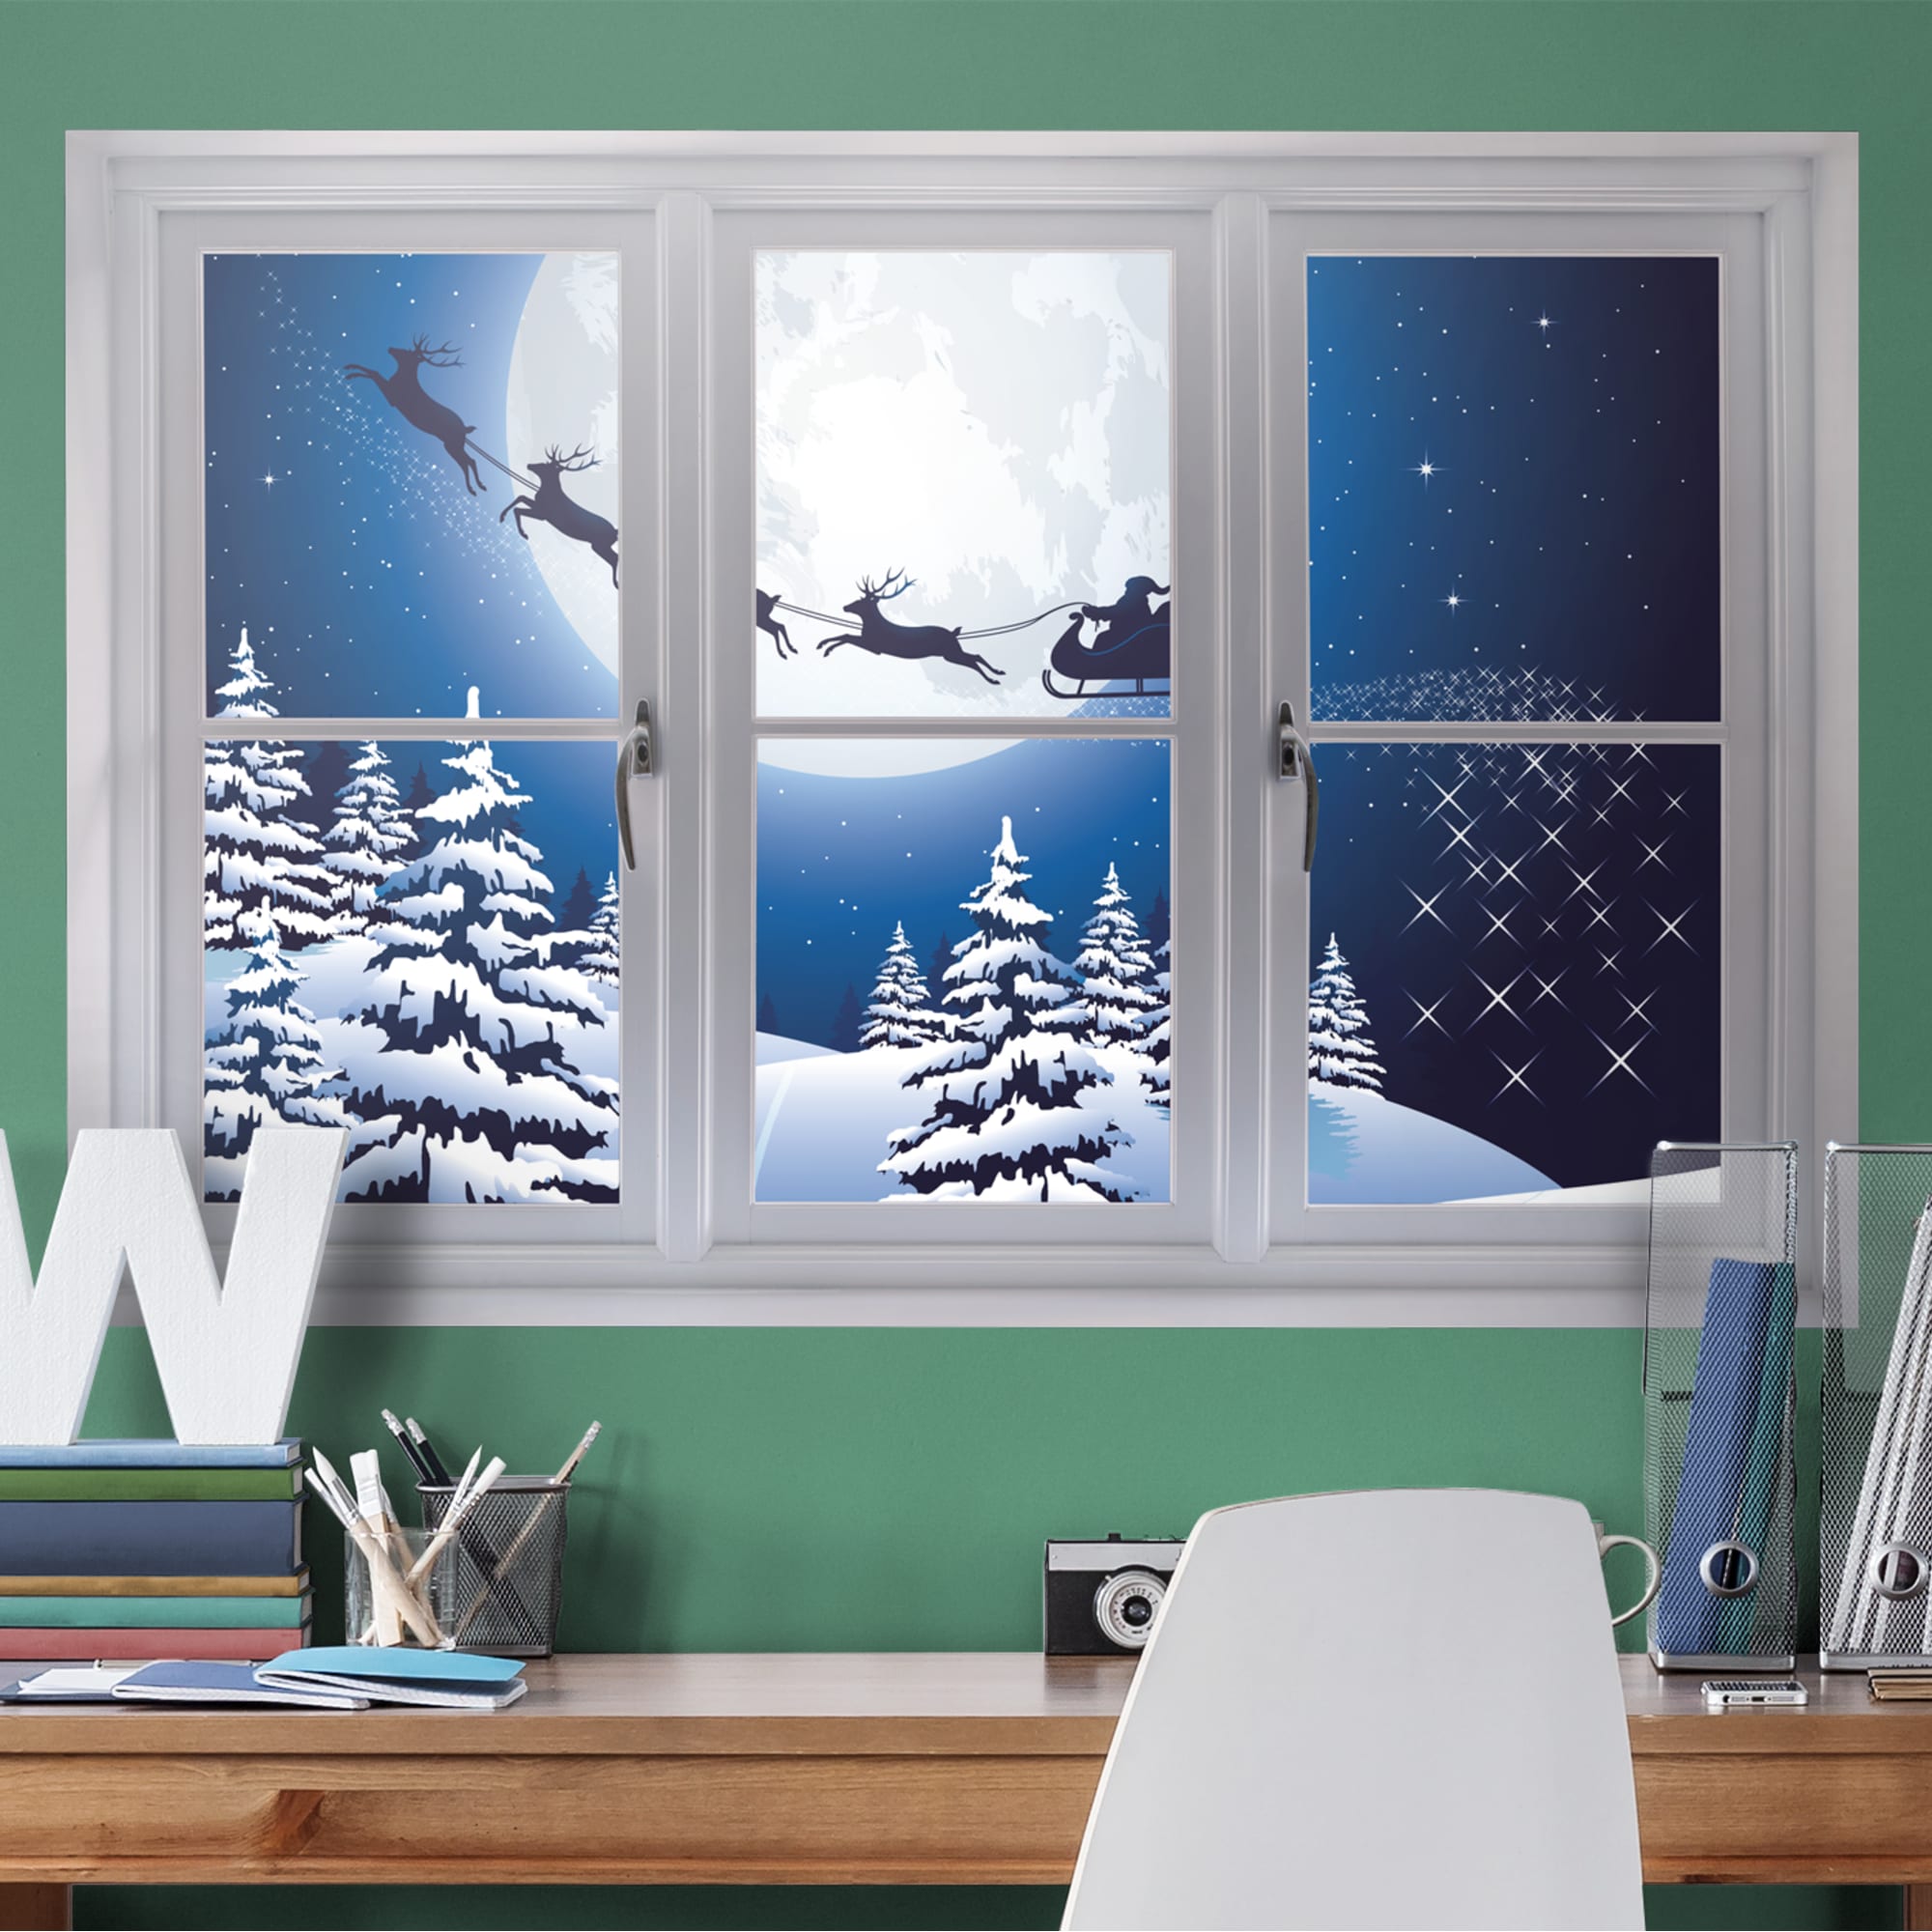 Instant Window: Santa Sleigh - Removable Wall Graphic 51.0"W x 34.0"H by Fathead | Vinyl